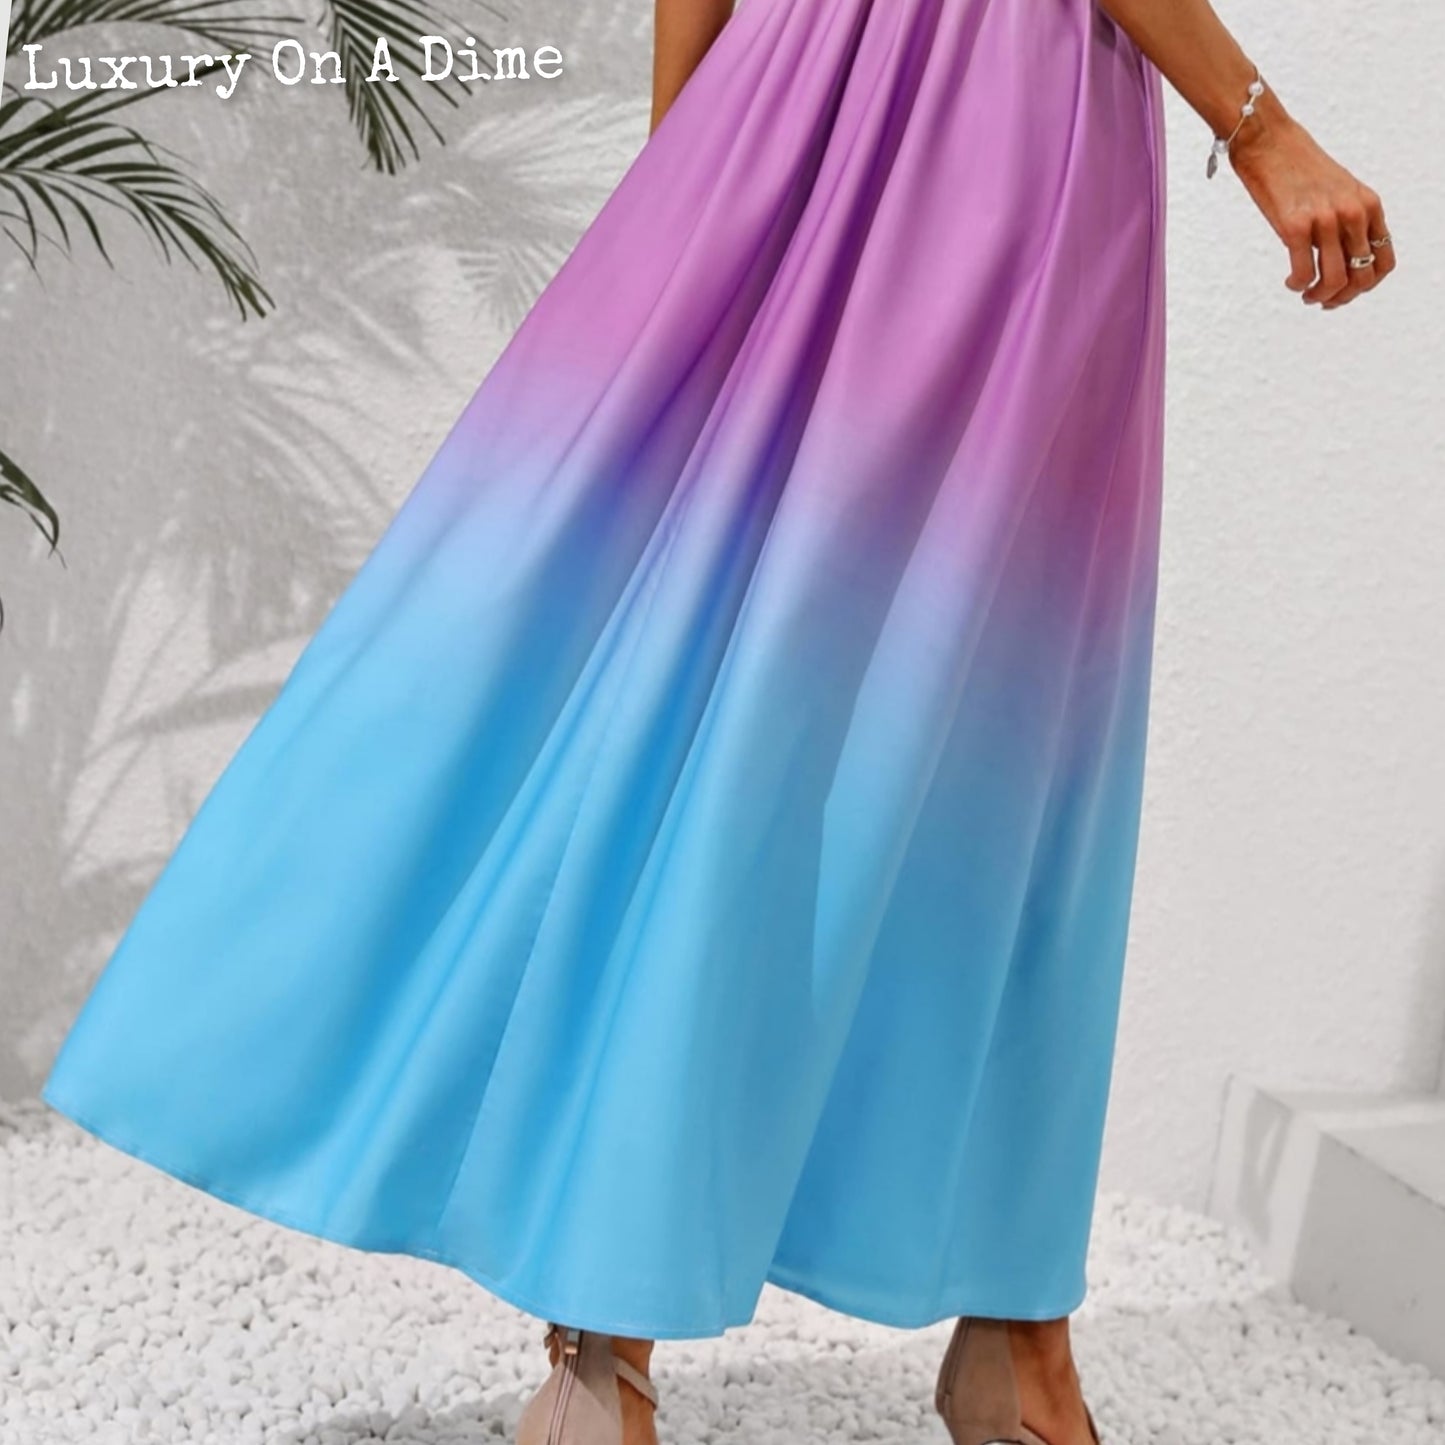 Colorful Ombre Rainbow Self-Tie Shoulder Smocked Bodice Summer Maxi Dress